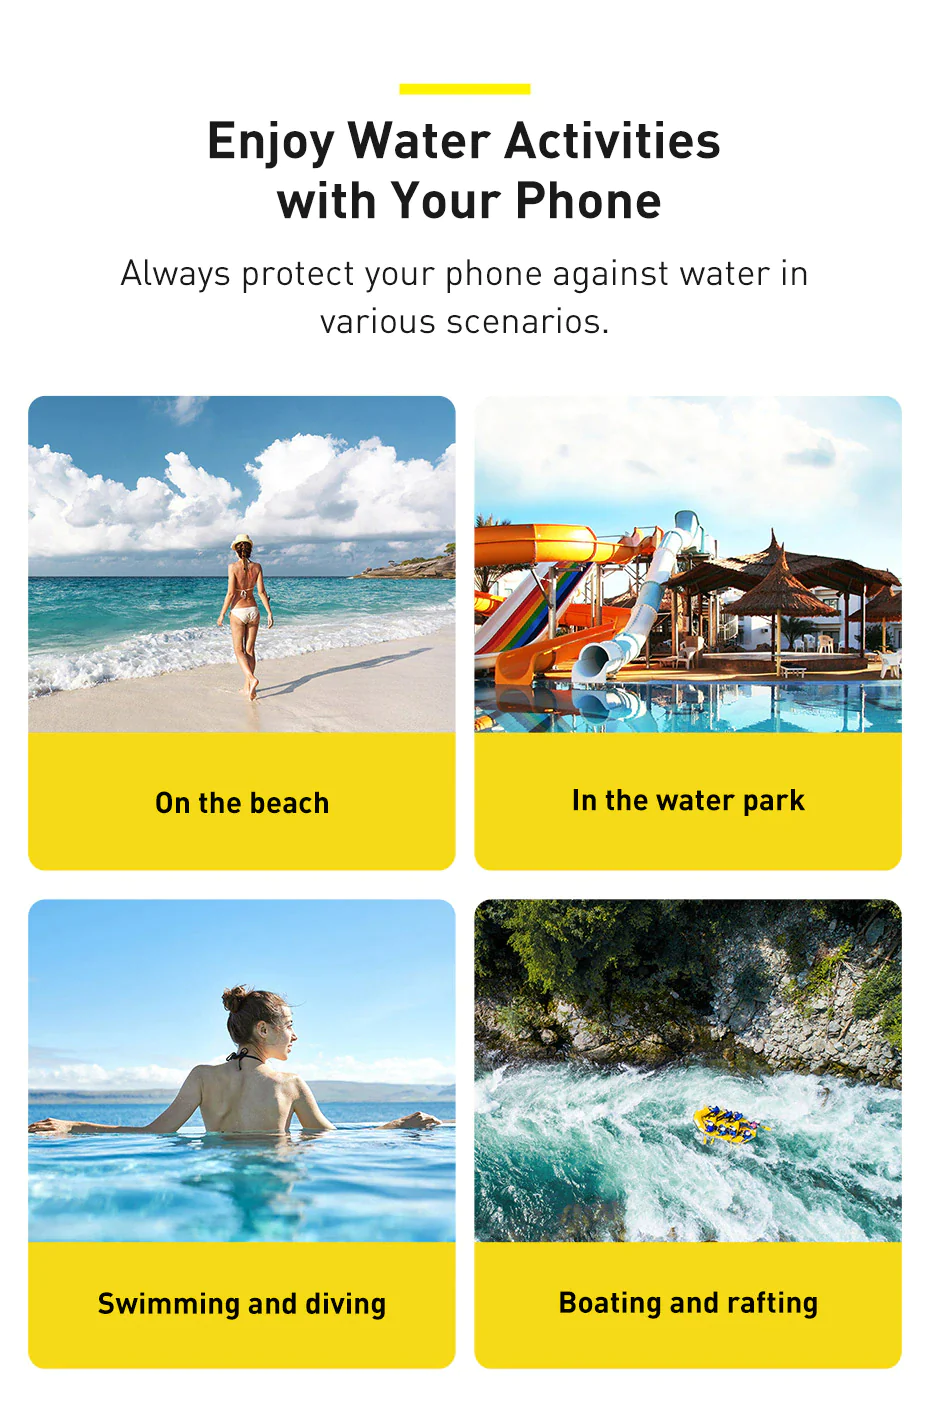 Enjoy Water Sports with Your Phone - Baseus Water Proof Pouch Bag and Protection Case for iPhone and Samsung